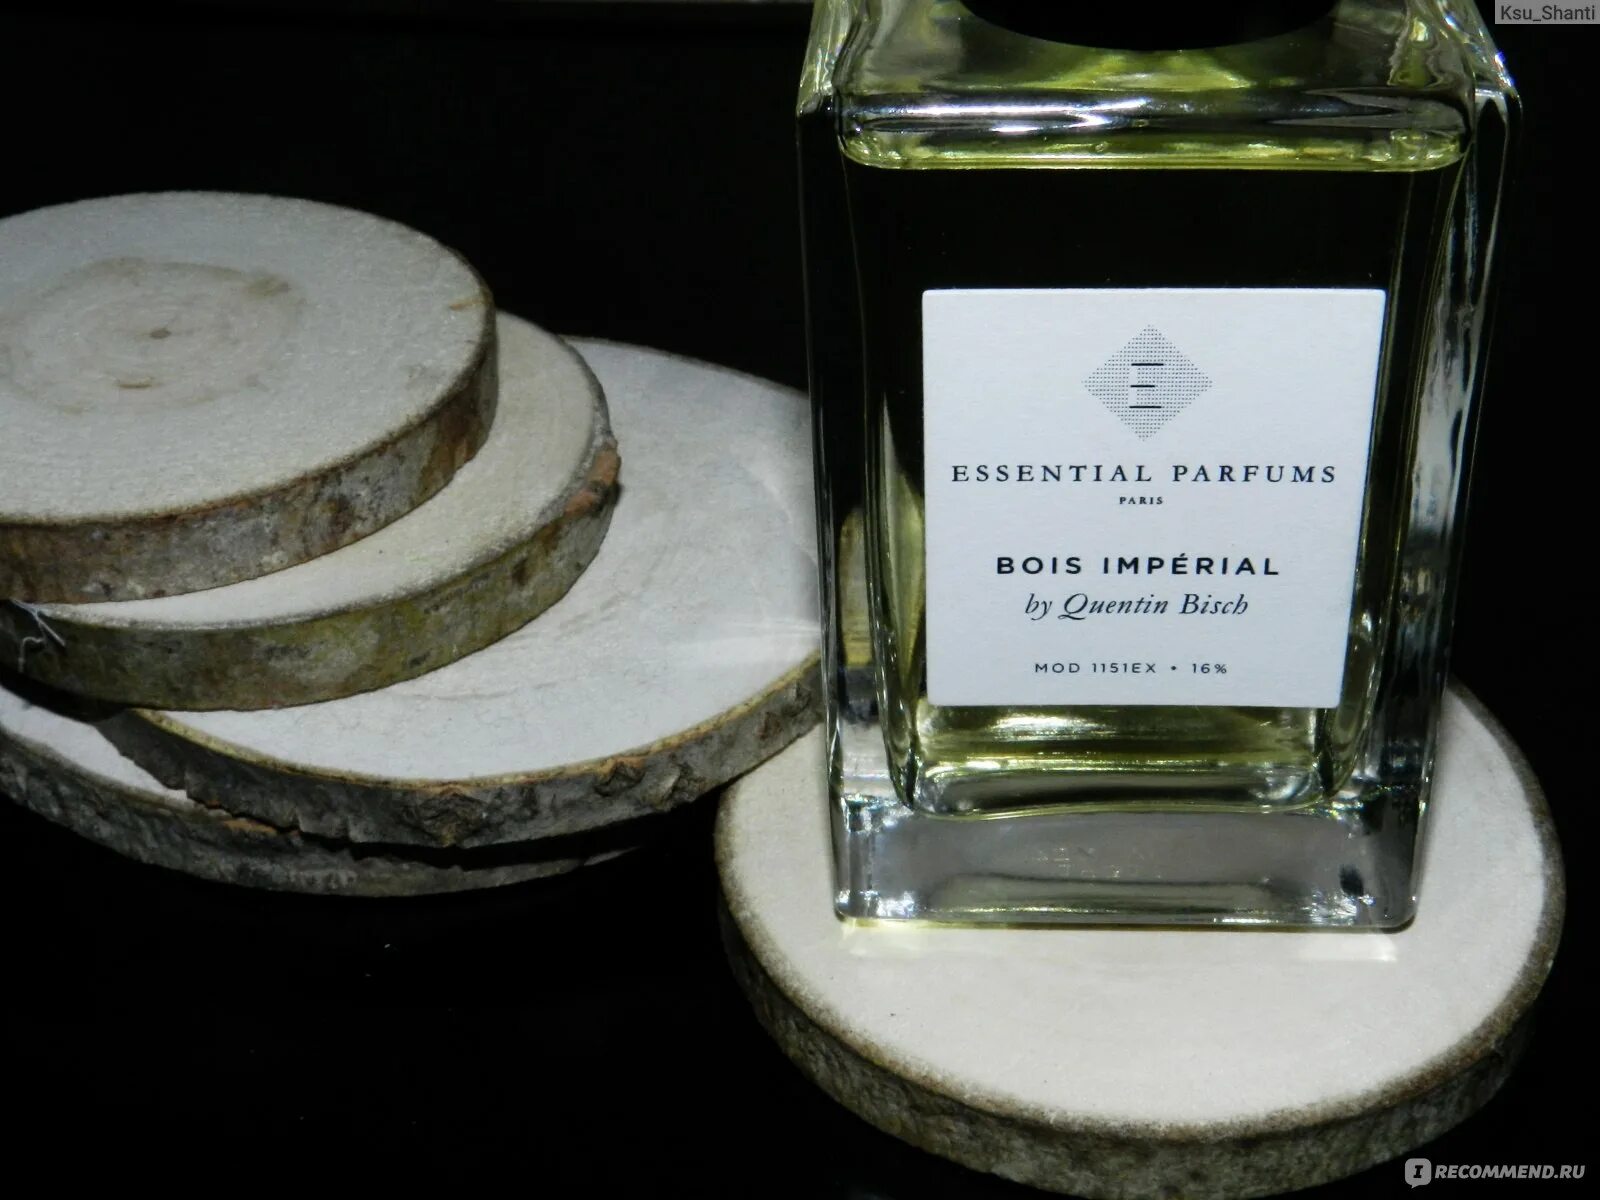 Аромат bois Imperial. Ессентиал Парфюм бойс Империал. Quentin bisch bois Imperial Essential Parfums. Бойс Империал Эссенциале. Bois imperial limited